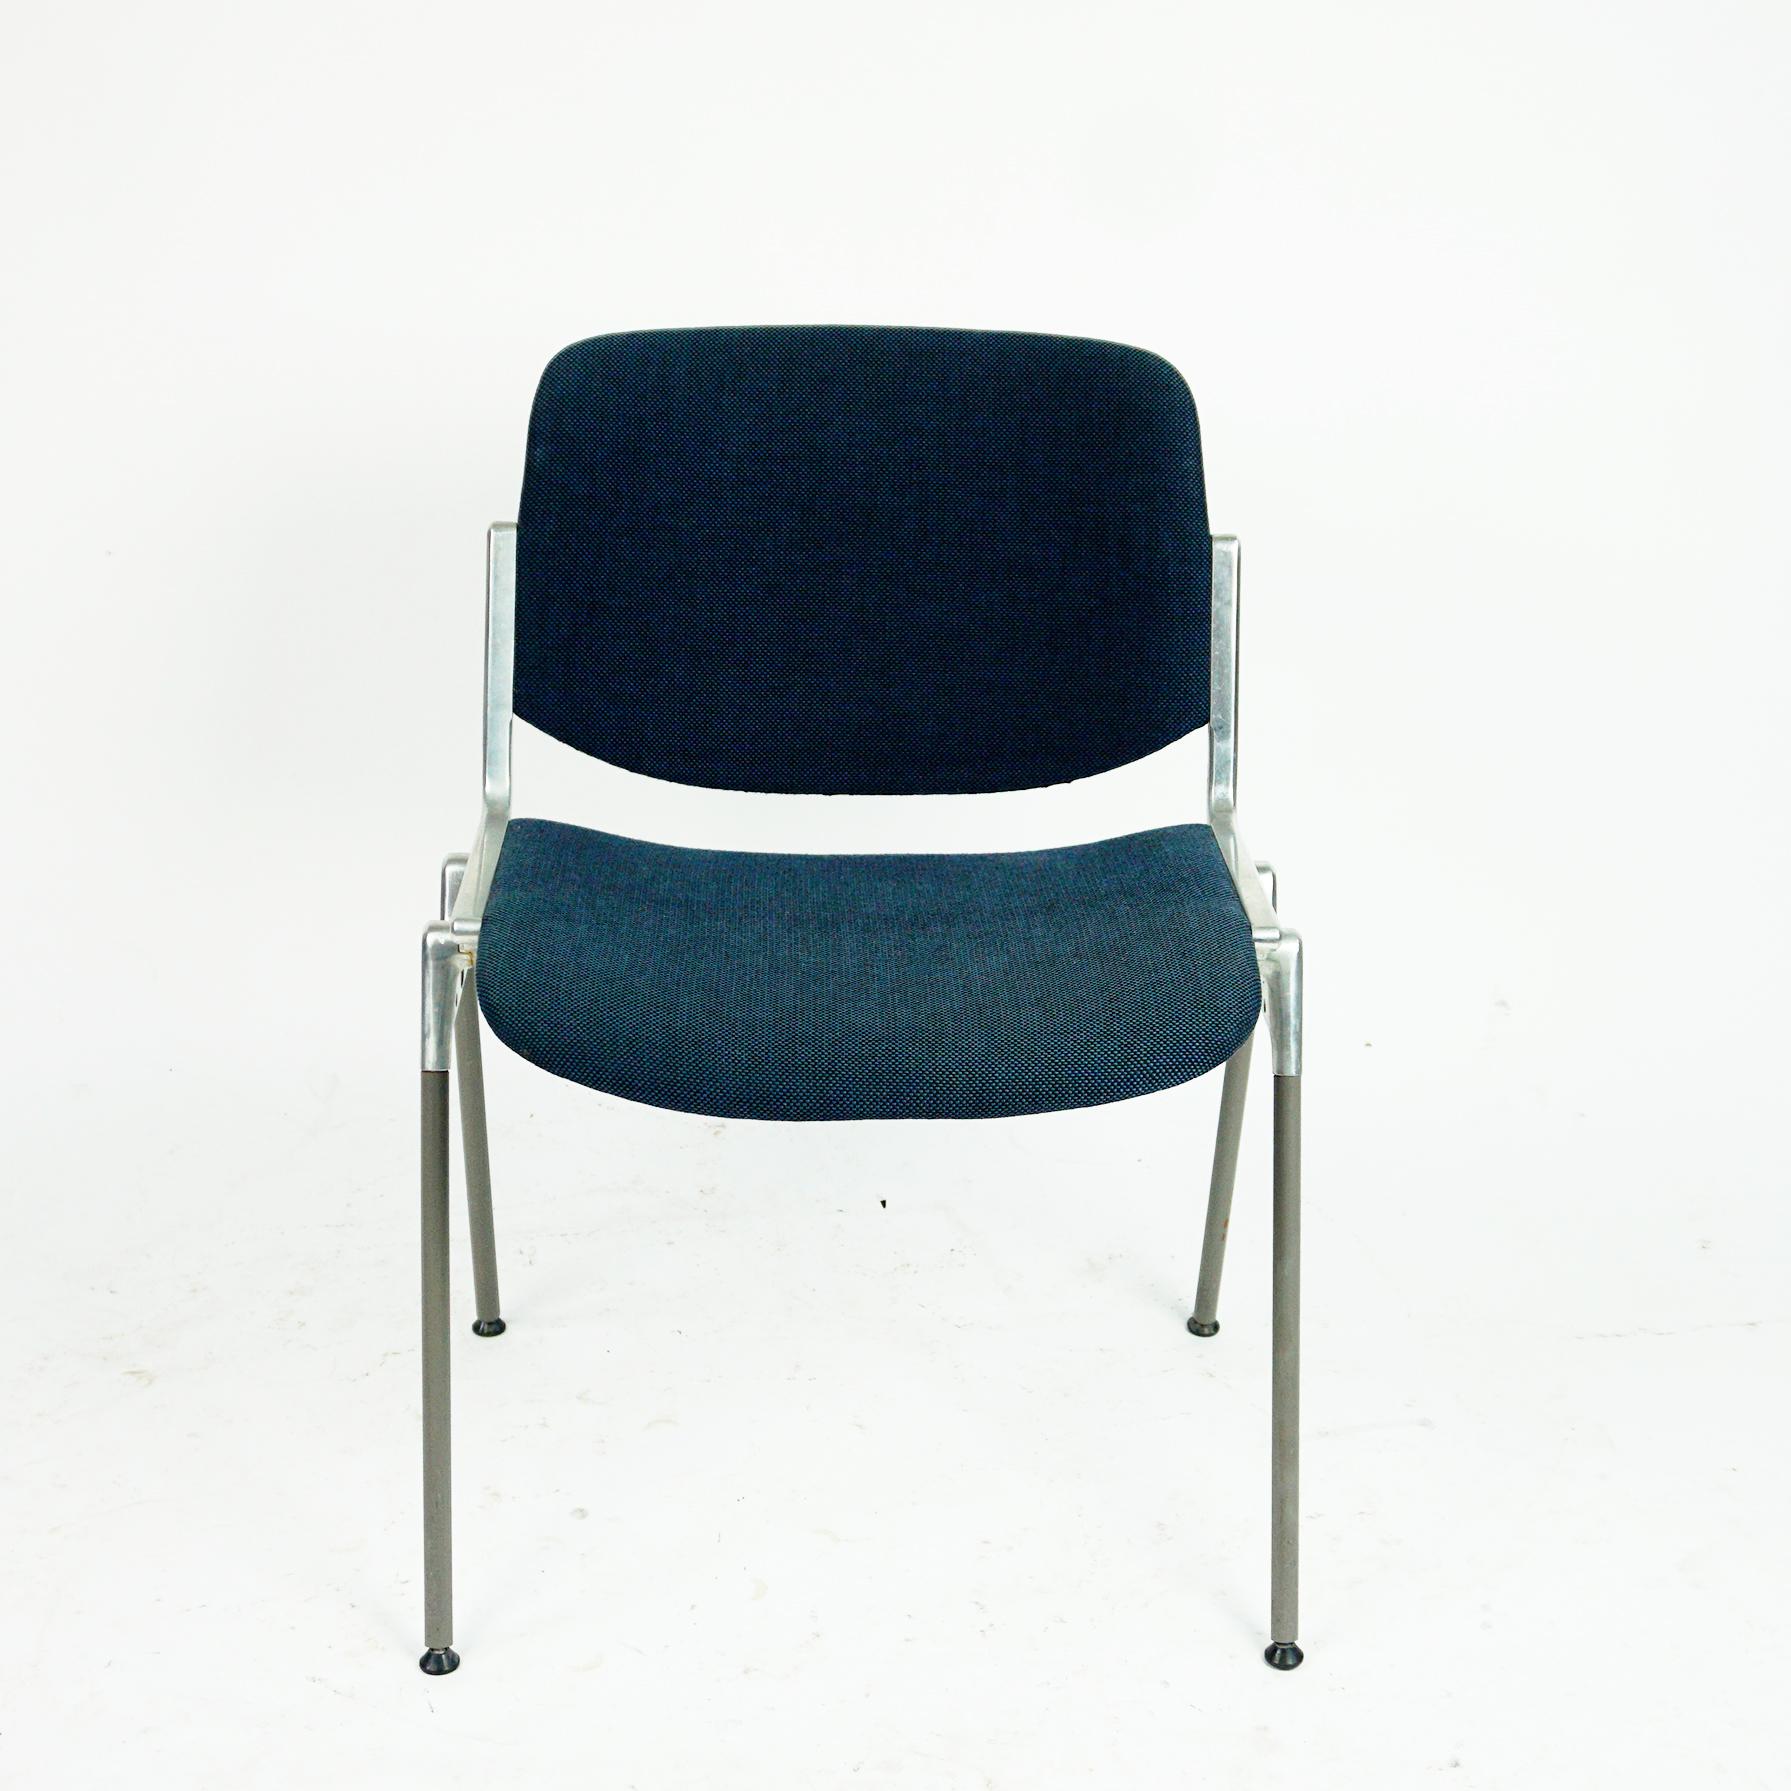 Italian Set of Four Blue Castelli Dsc 106 Stacking Chairs by Giancarlo Piretti, Italy For Sale